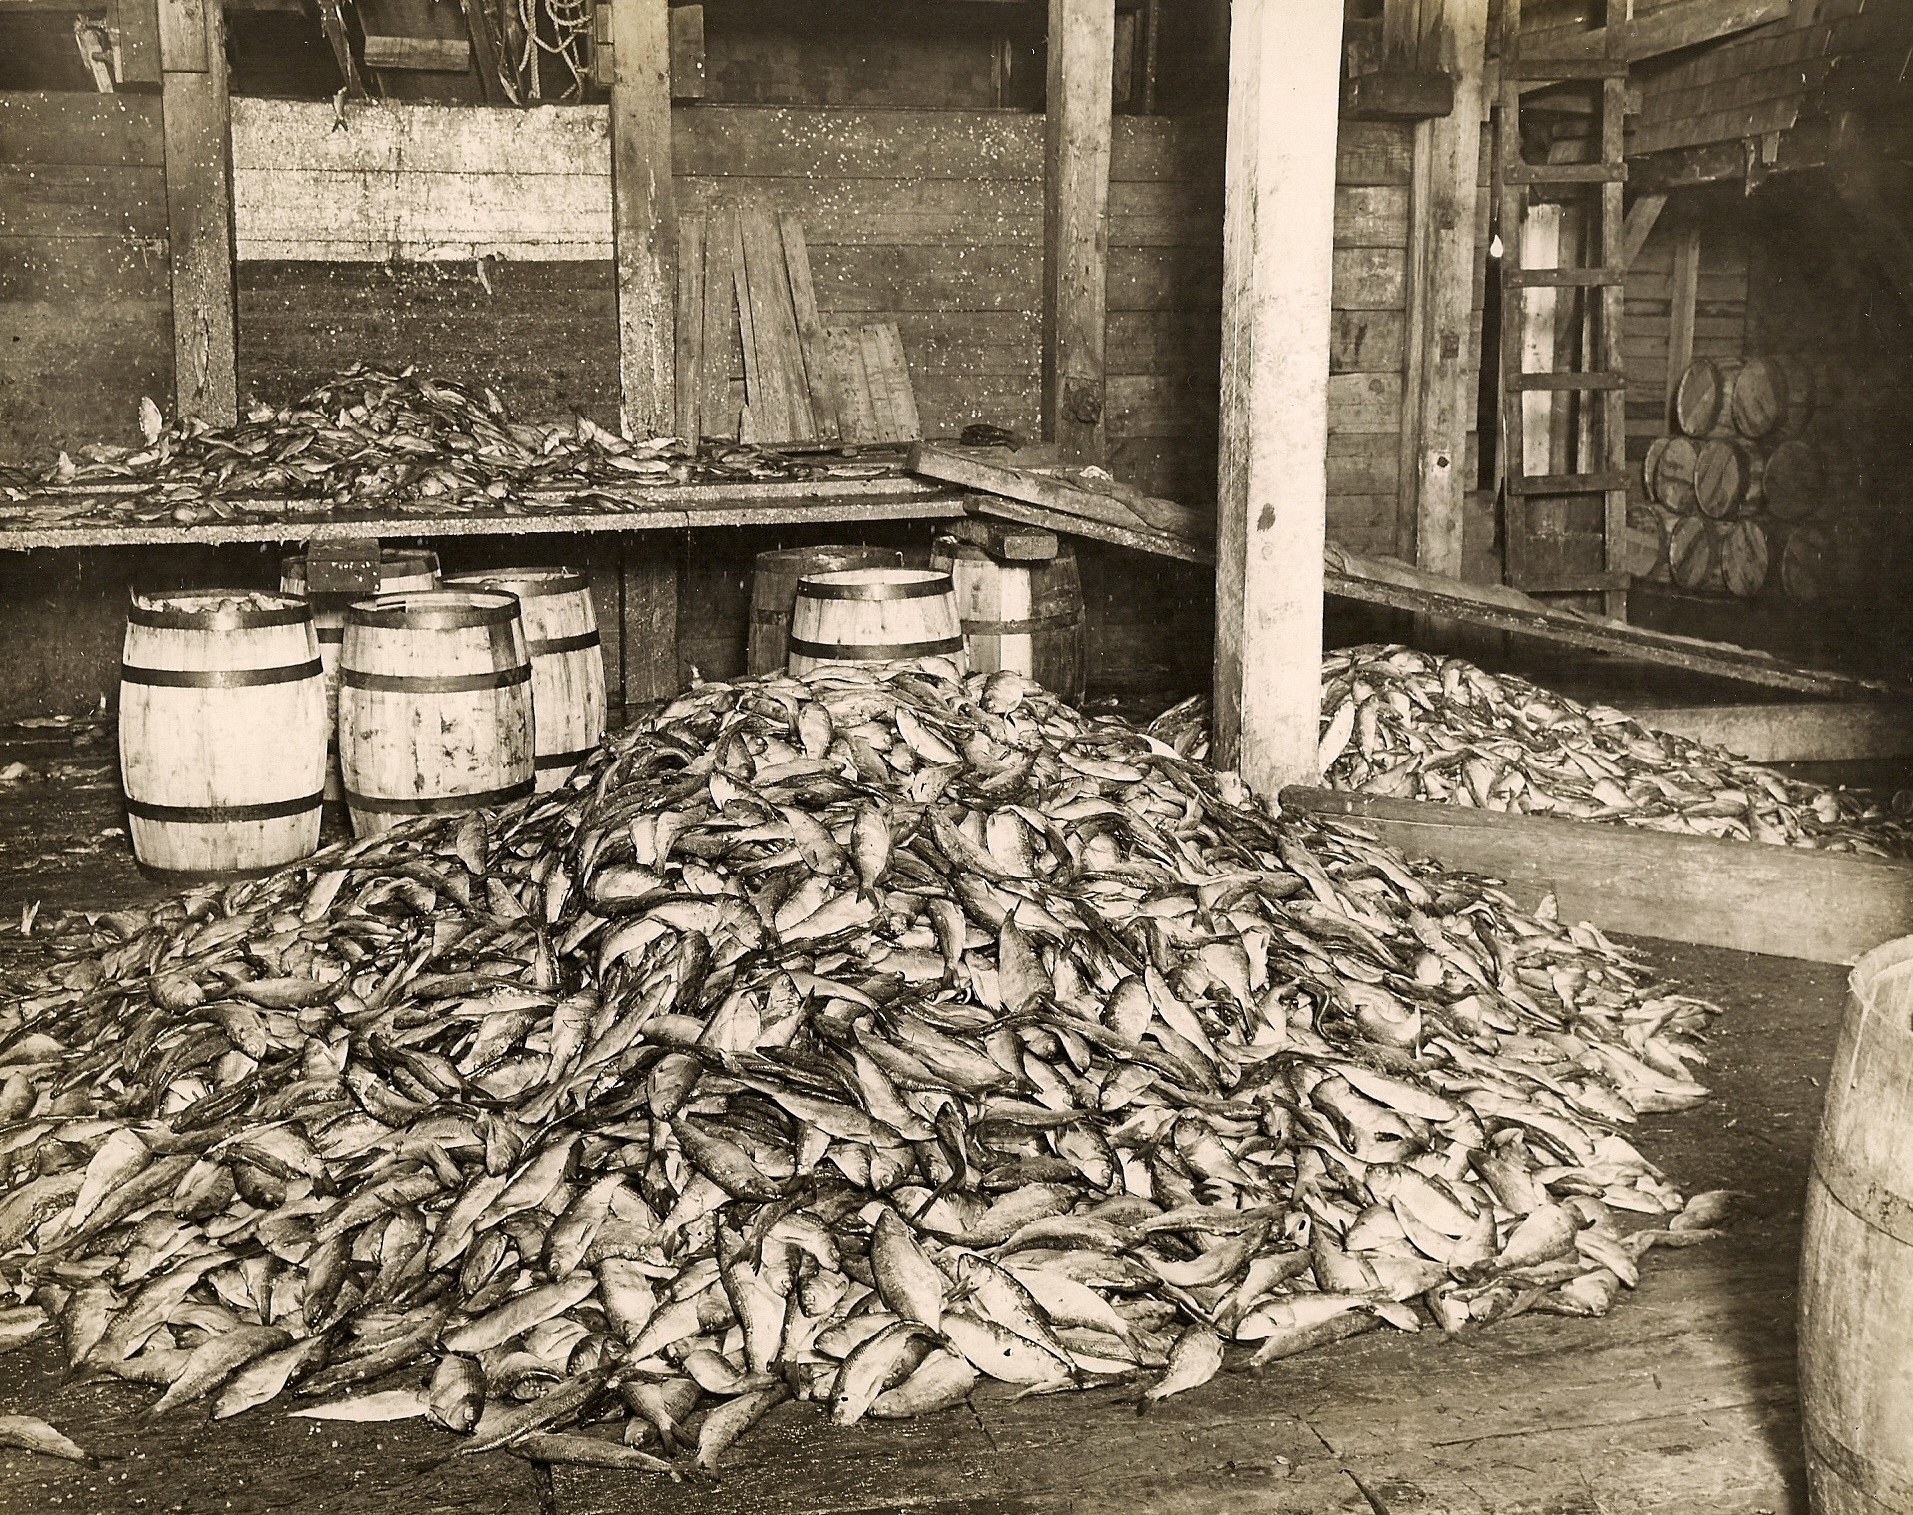 Piles of fish inside a wooden shed – barrels in background.